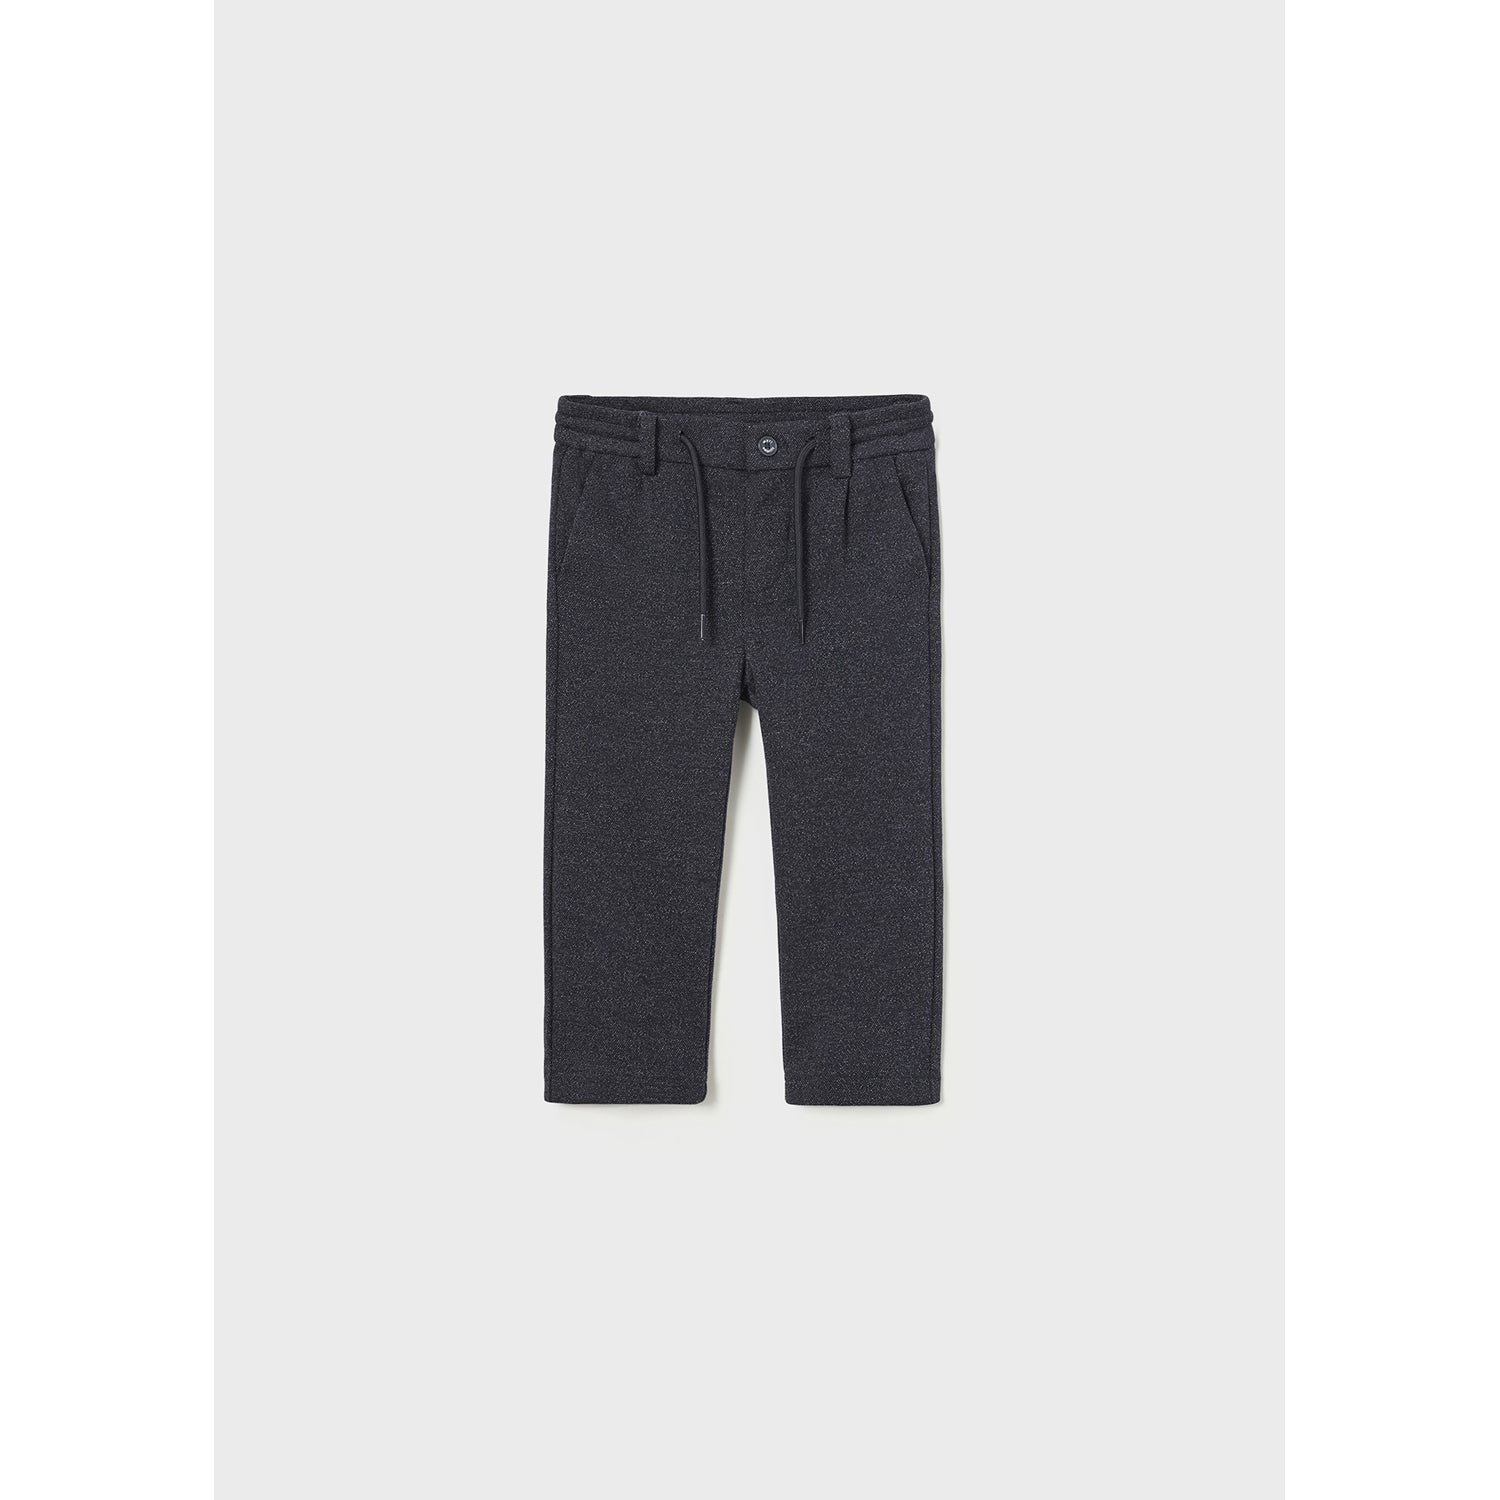 Trouser Navy Stretch Pant - Mayoral